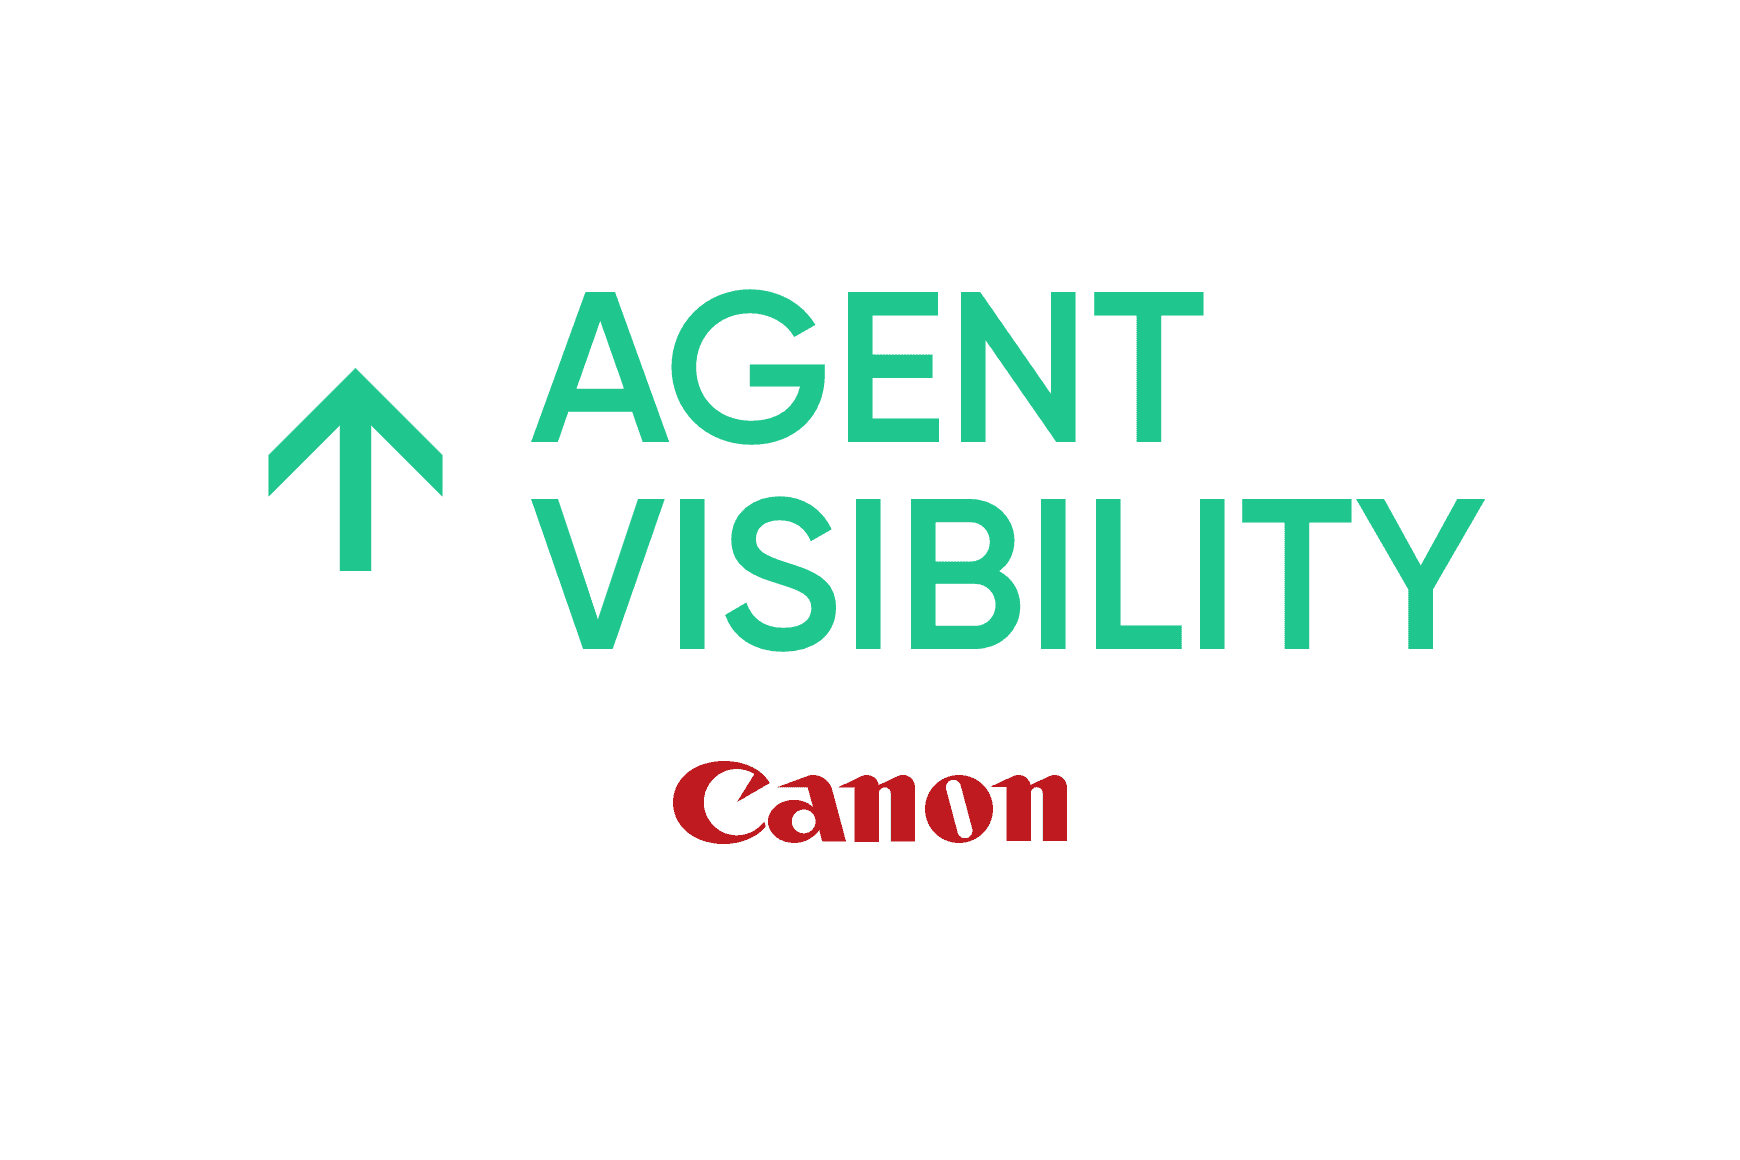 Canon: Improved agent productivity and visibility